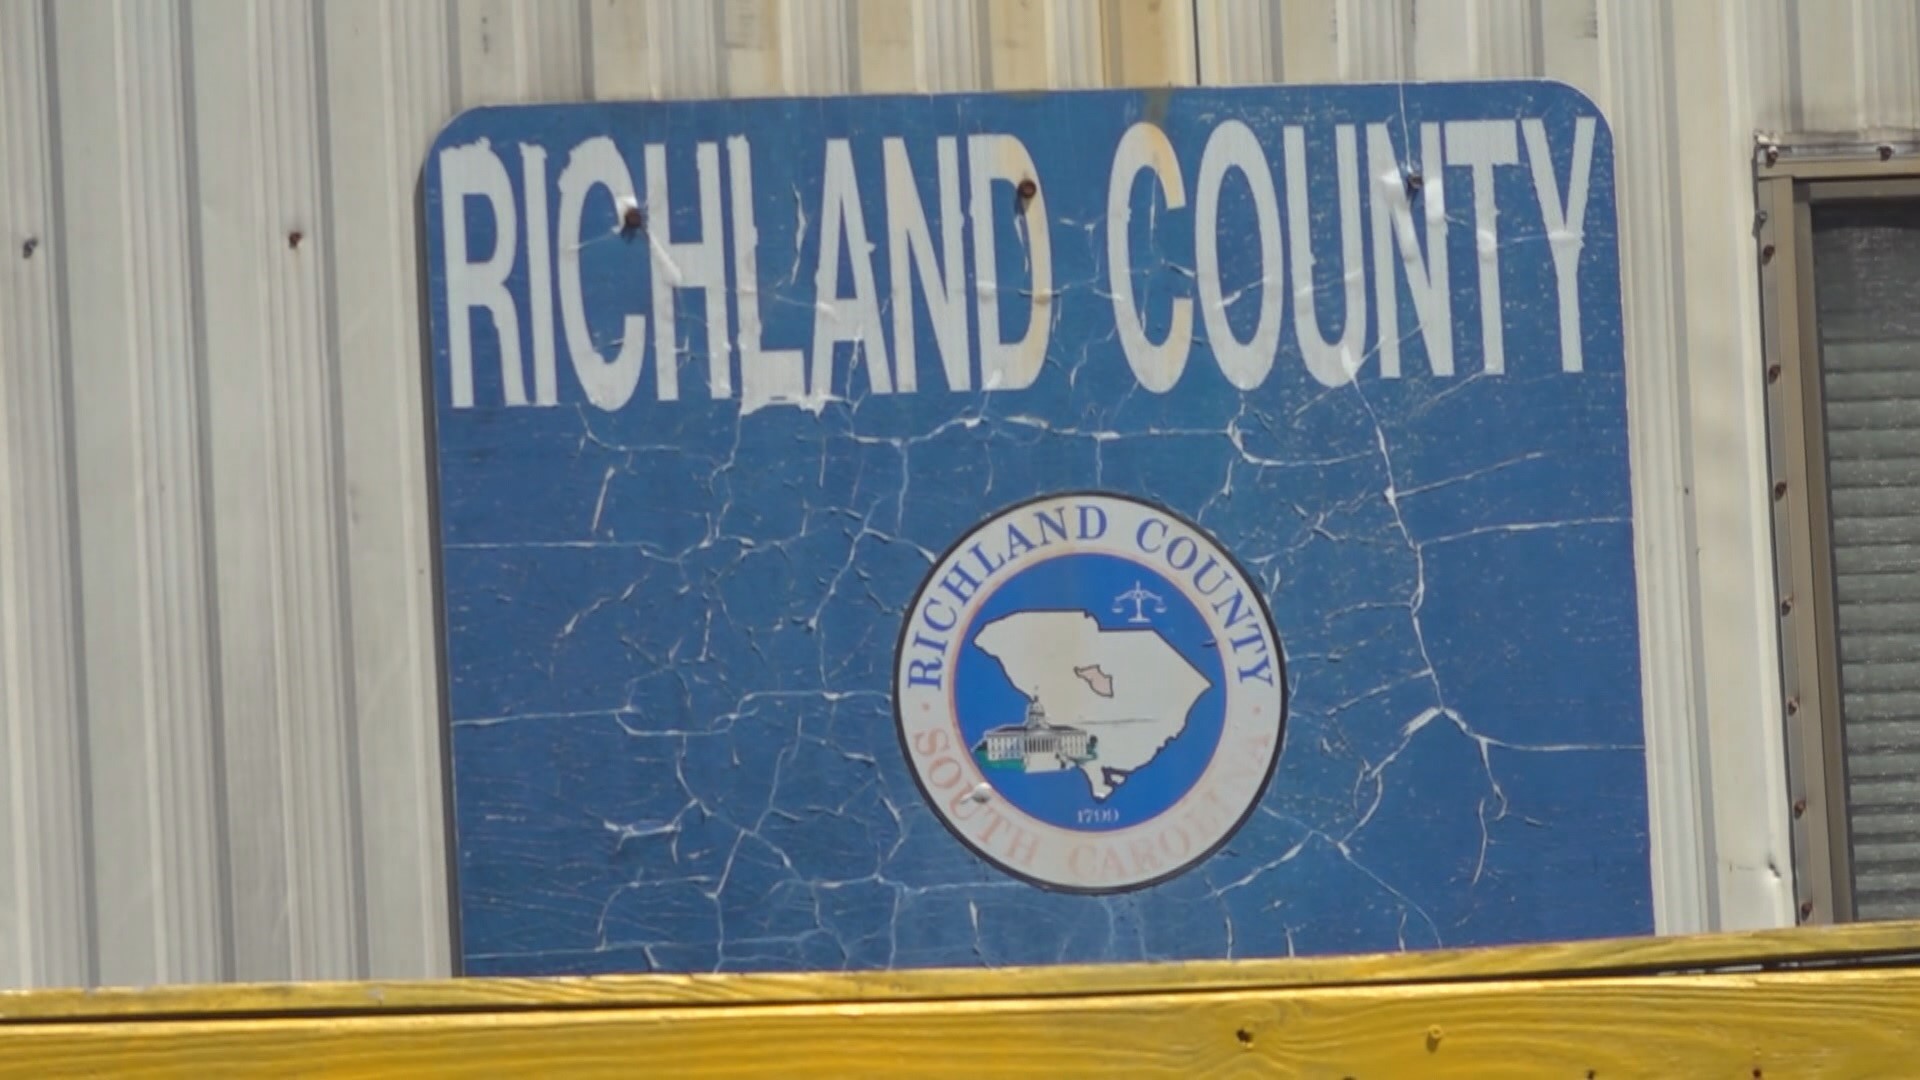 Richland County Councilmember is hoping to inform the public about $16 million that will be available by the end of the year.